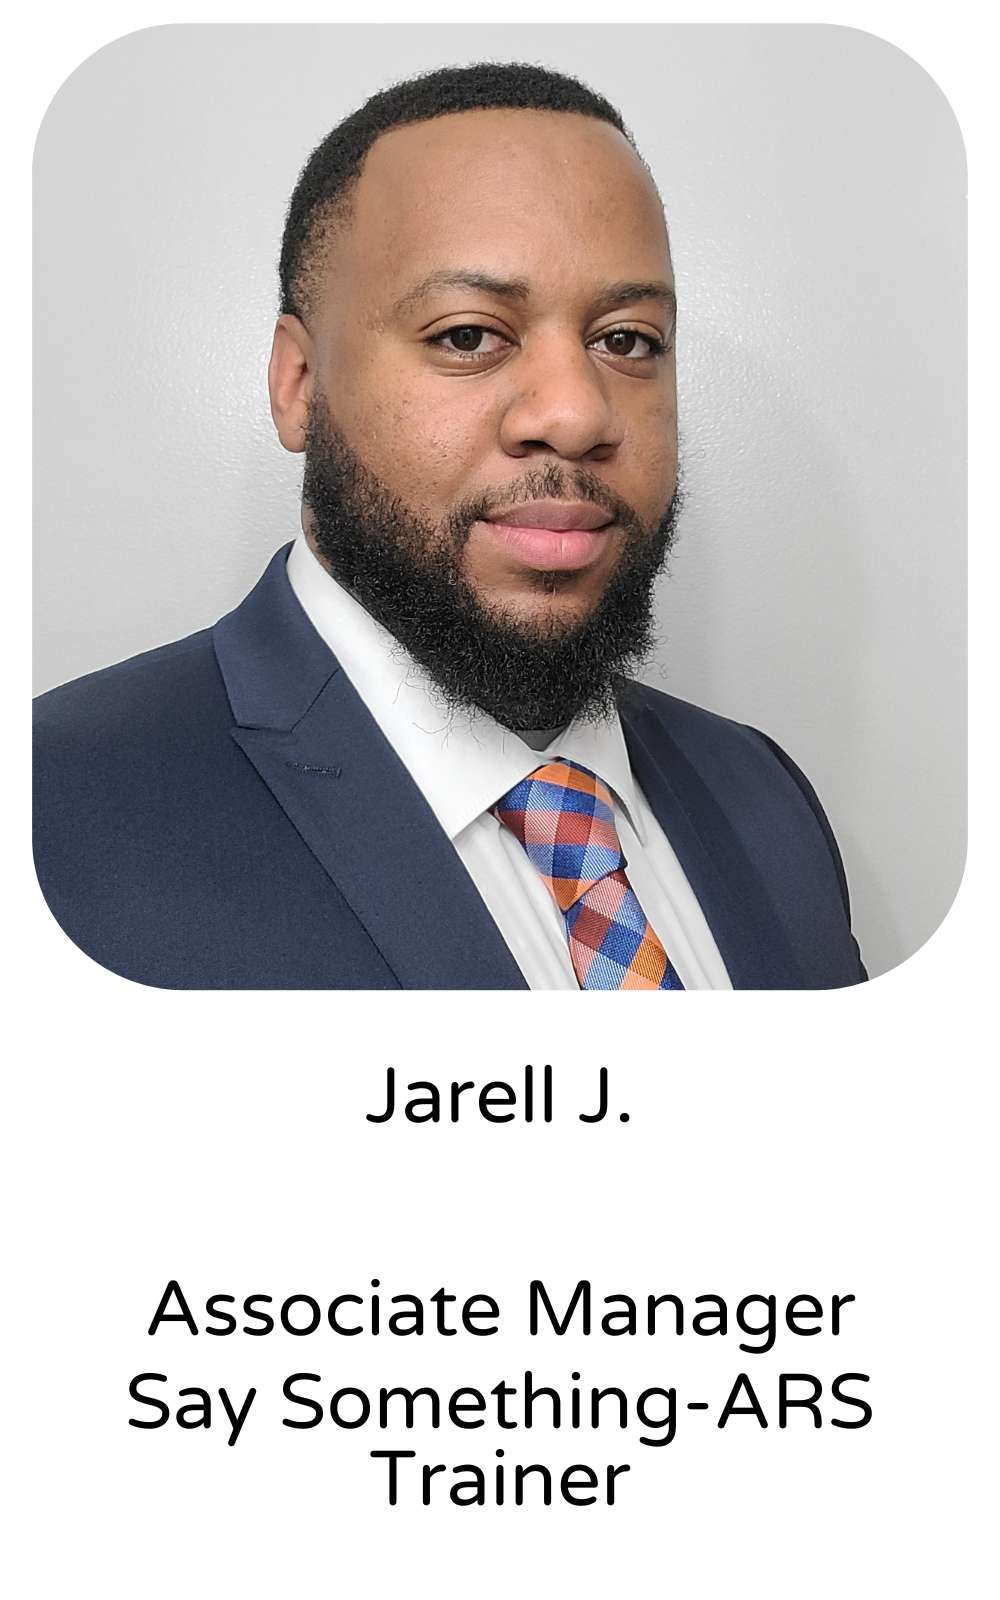 Jarell J., Associate Manager, Say Something-ARS Trainer